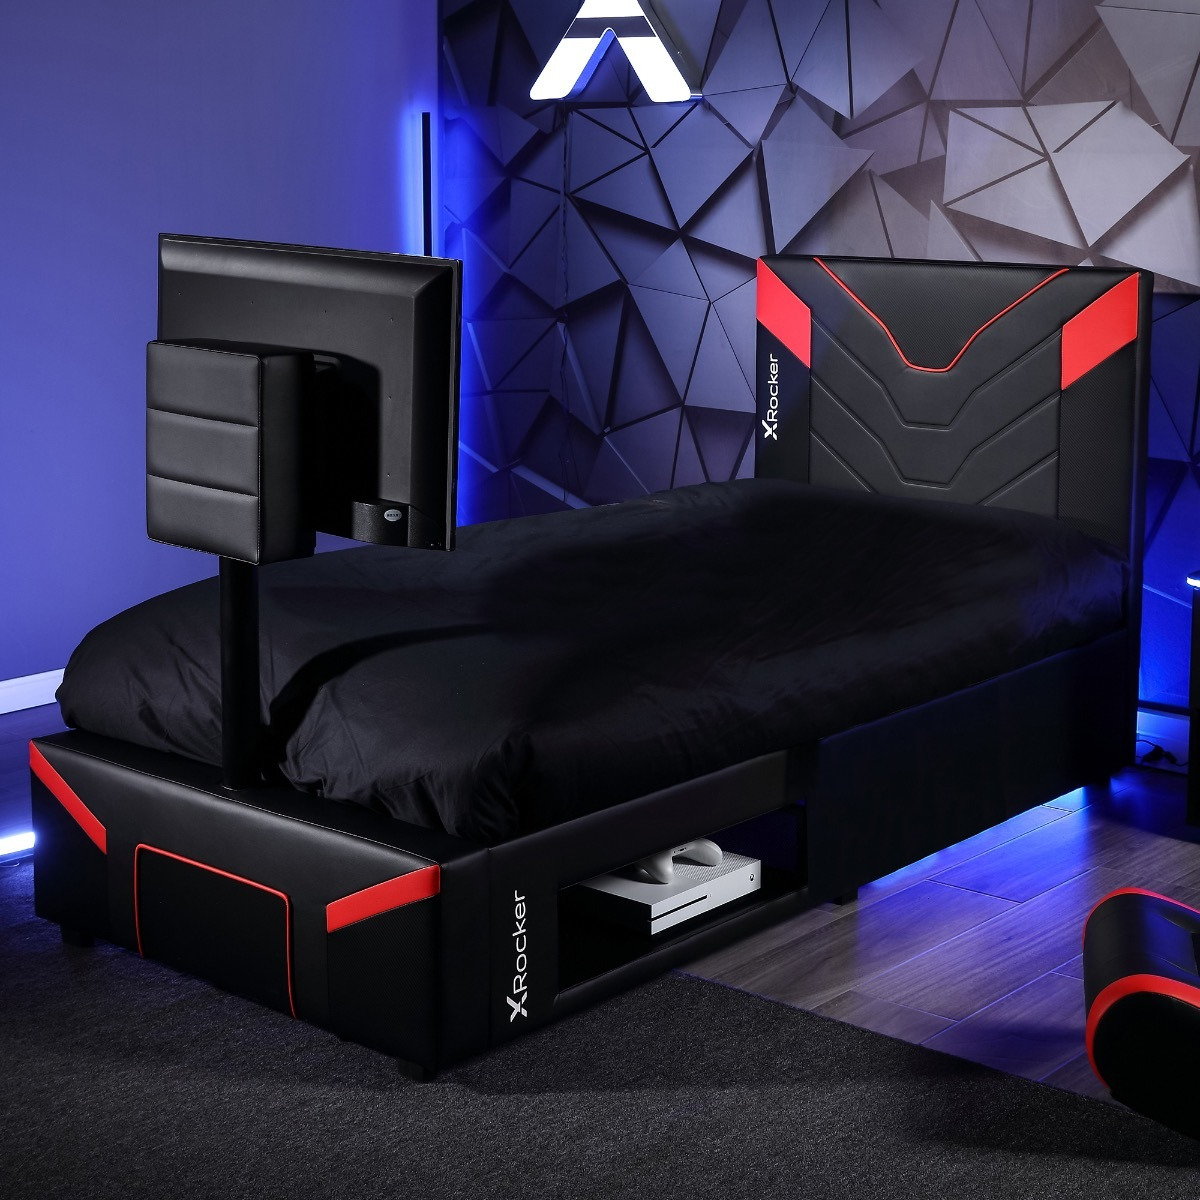 X Rocker Cerberus Twist TV Gaming Bed Single Black and Red - image 1